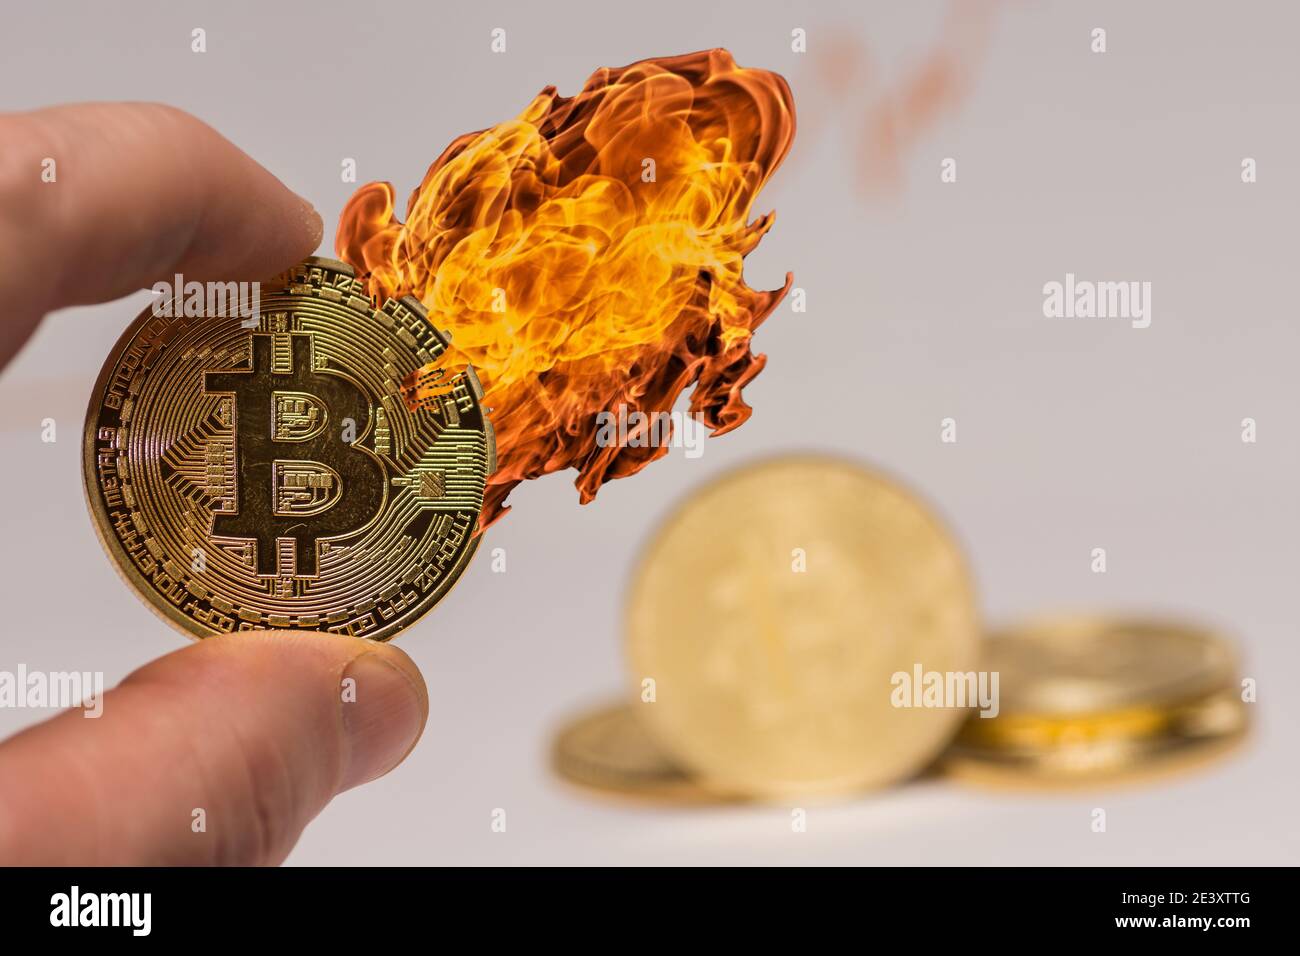 bitcoin held between two fingers with hot fire on the coin with other coins in the background Stock Photo